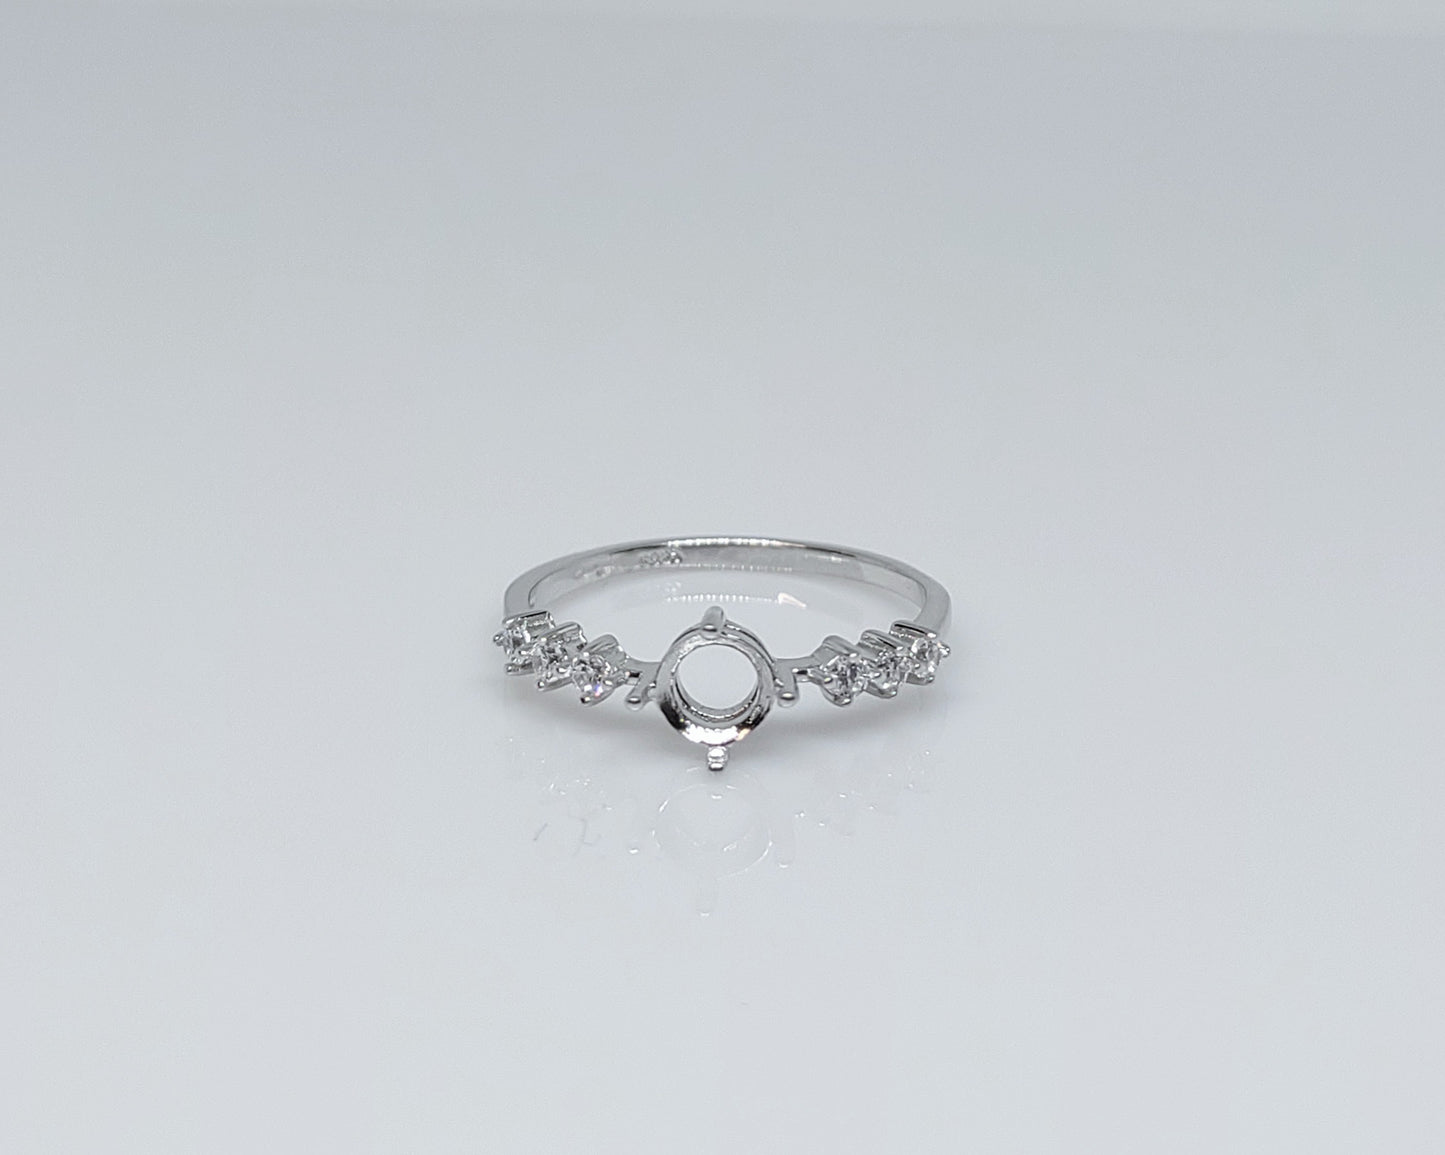 A silver semi mount with tiny round clear gems on both sides.